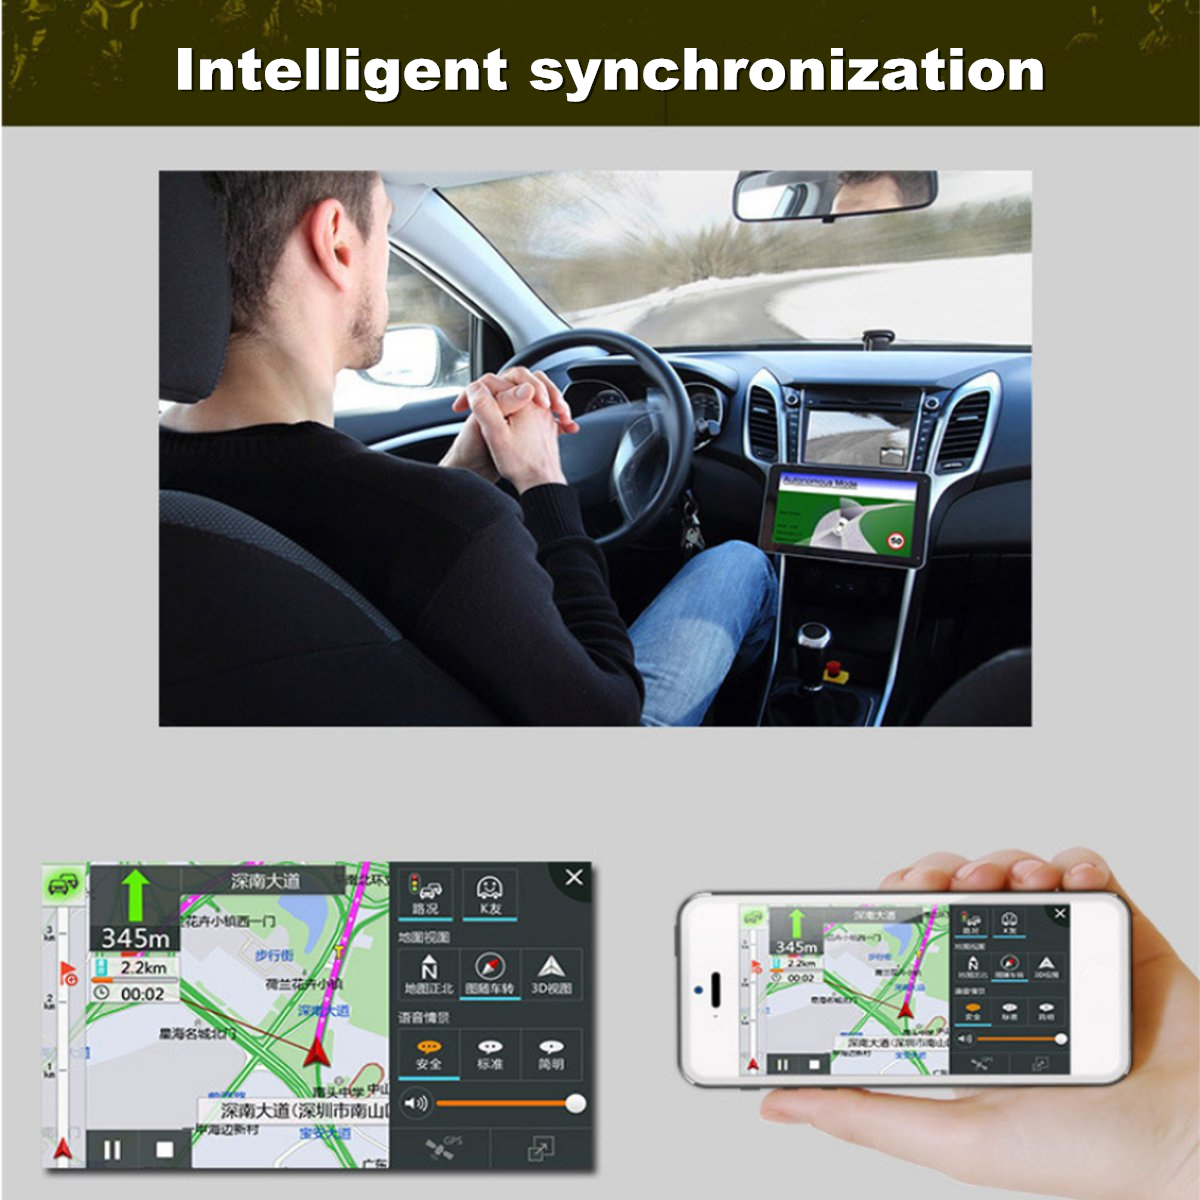 7-Inch-Android-60-Double-2-DIN-Sat-Navigation-Car-GPS-Navigation-Stereo-DAB-1426037